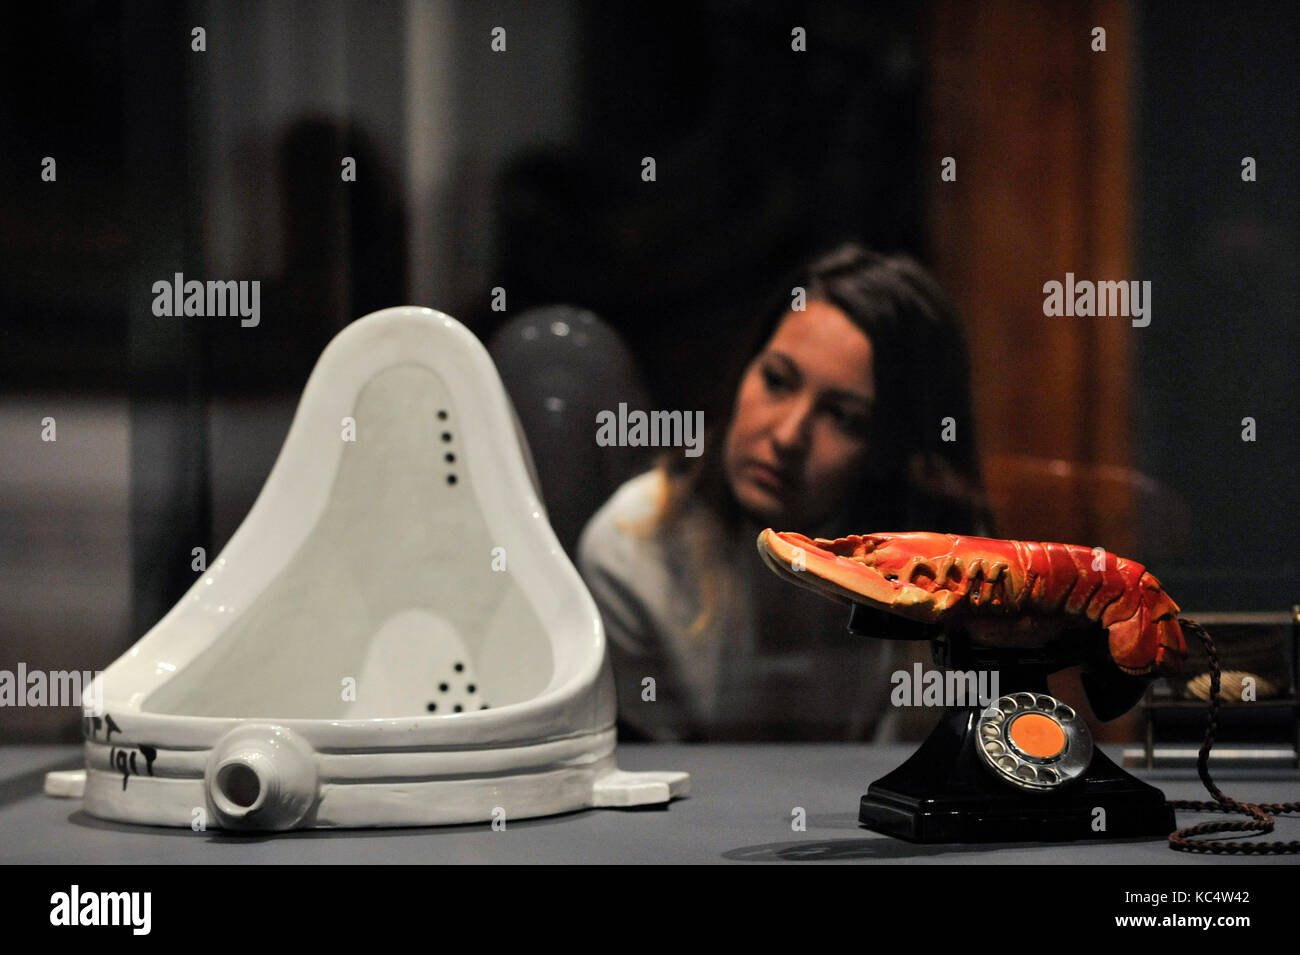 London, UK.  3 October 2017.  A staff member views (L to R) 'Fountain, 1917', 1964 edition, by Michel Duchamp and 'Lobster Telephone (red)', 1938, by Salvador Dali with Edward James at the preview of 'Dali / Duchamp', a new exhibition of works by Salvador Dali and Michel Duchamp taking place at the Royal Academy of Arts in Piccadilly.  Over 80 artworks in different media are on display from 7 October to 3 January 2018. Credit: Stephen Chung / Alamy Live News Stock Photo